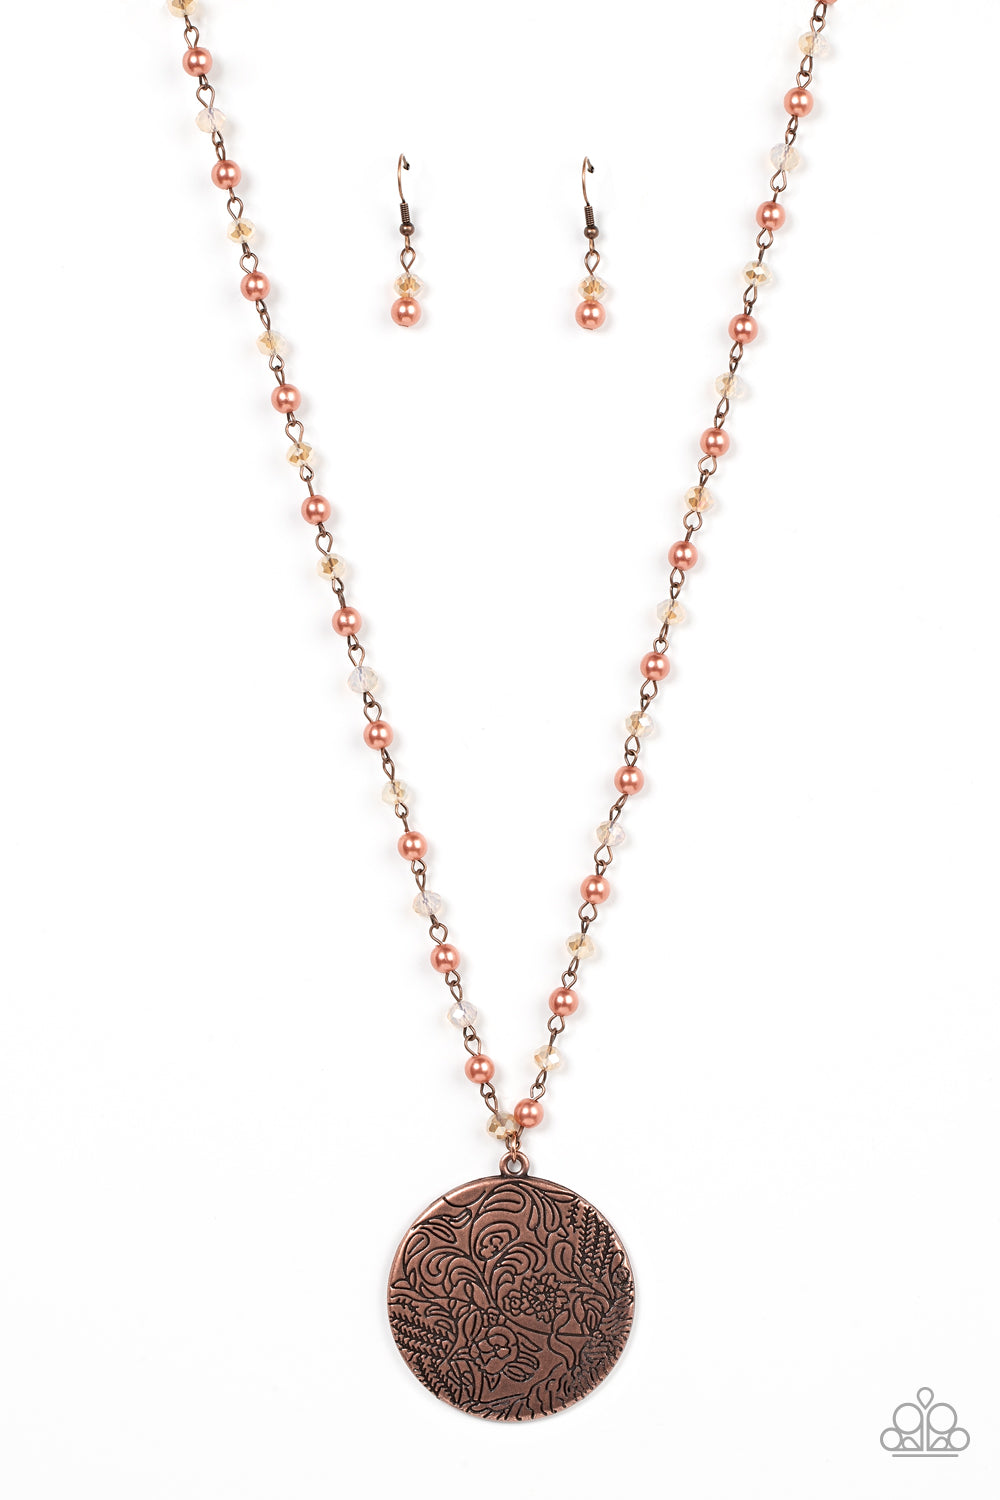 Secret Cottage Paparazzi Accessories Necklace with Earrings Copper